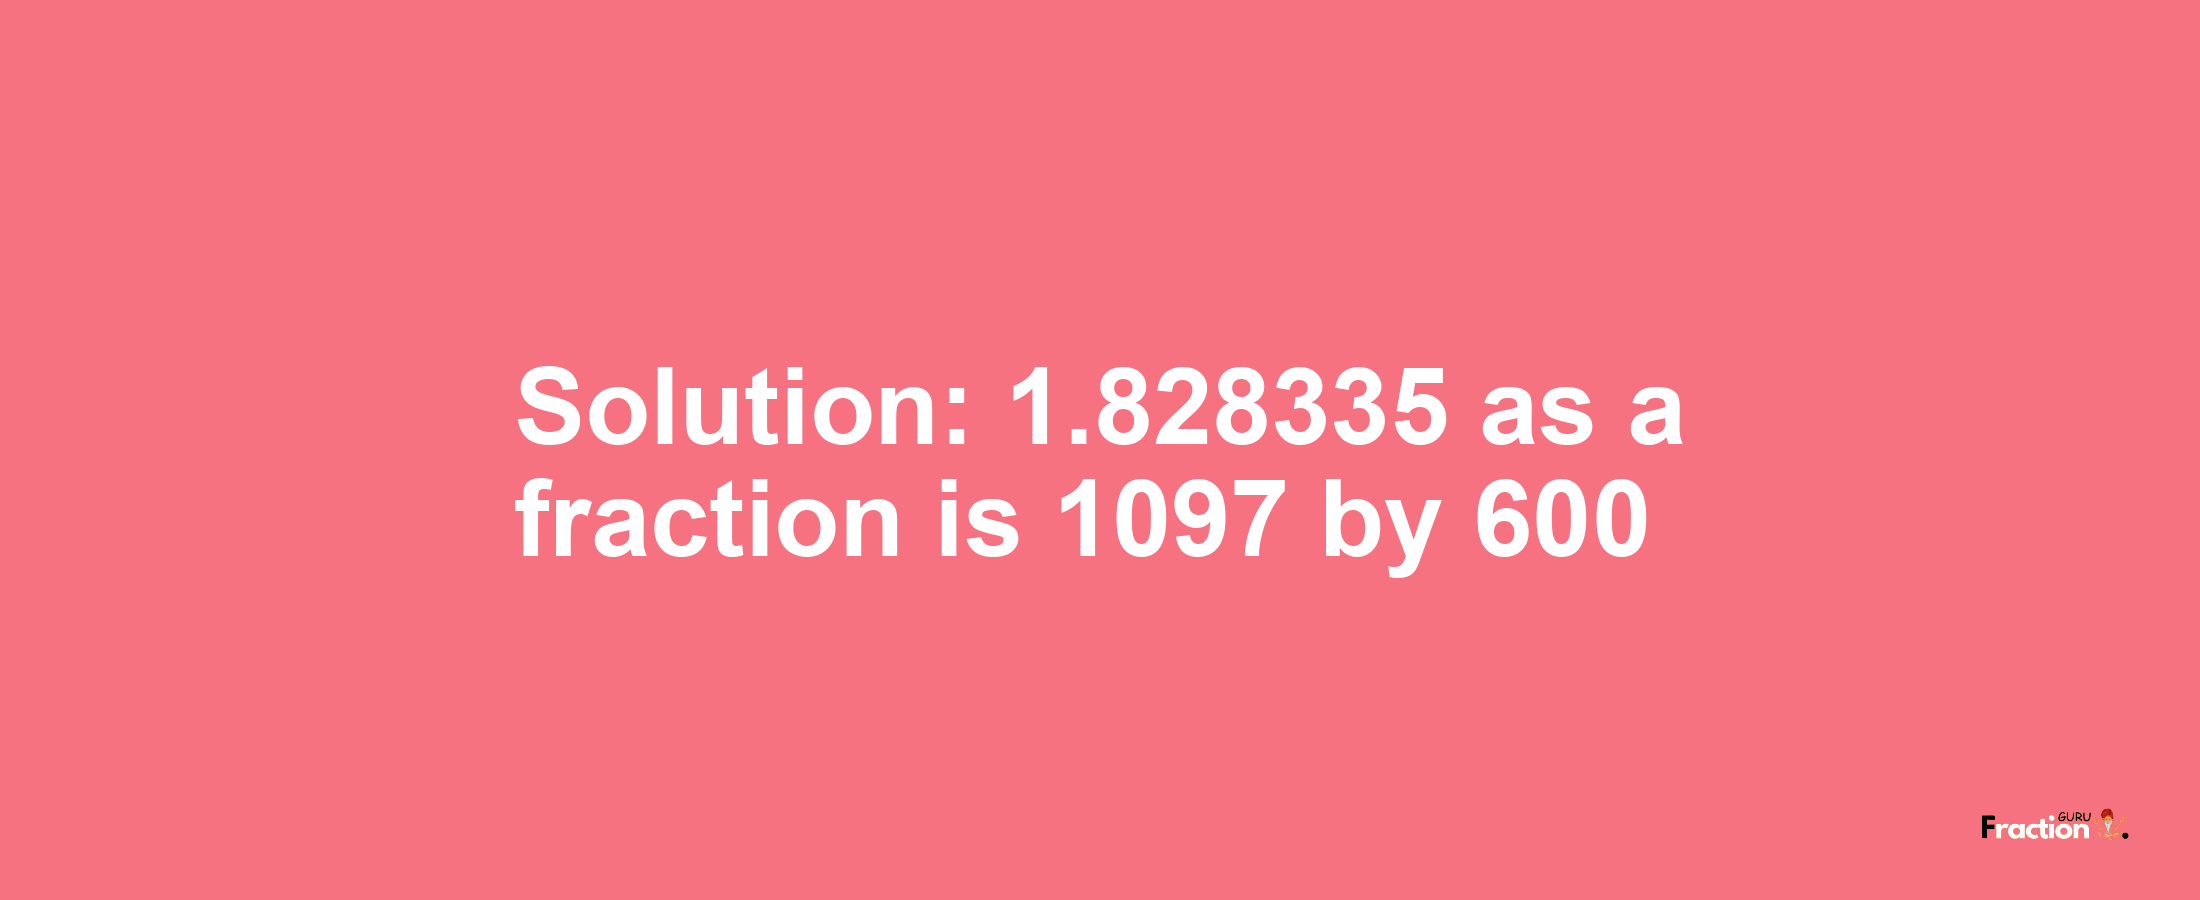 Solution:1.828335 as a fraction is 1097/600